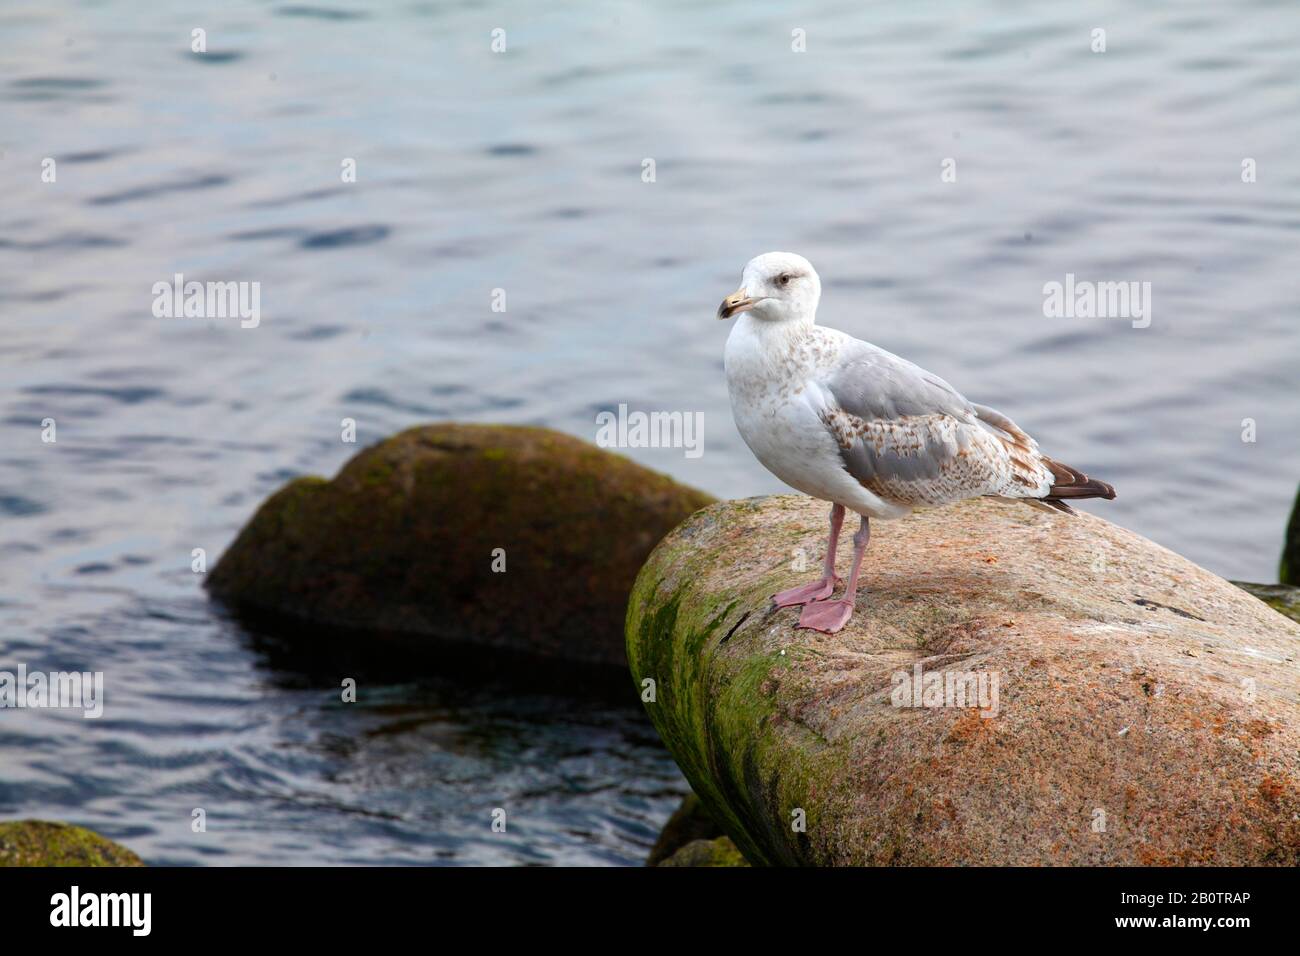 Seagull sitting on a rock by a body of water, Germany, Europe Stock Photo